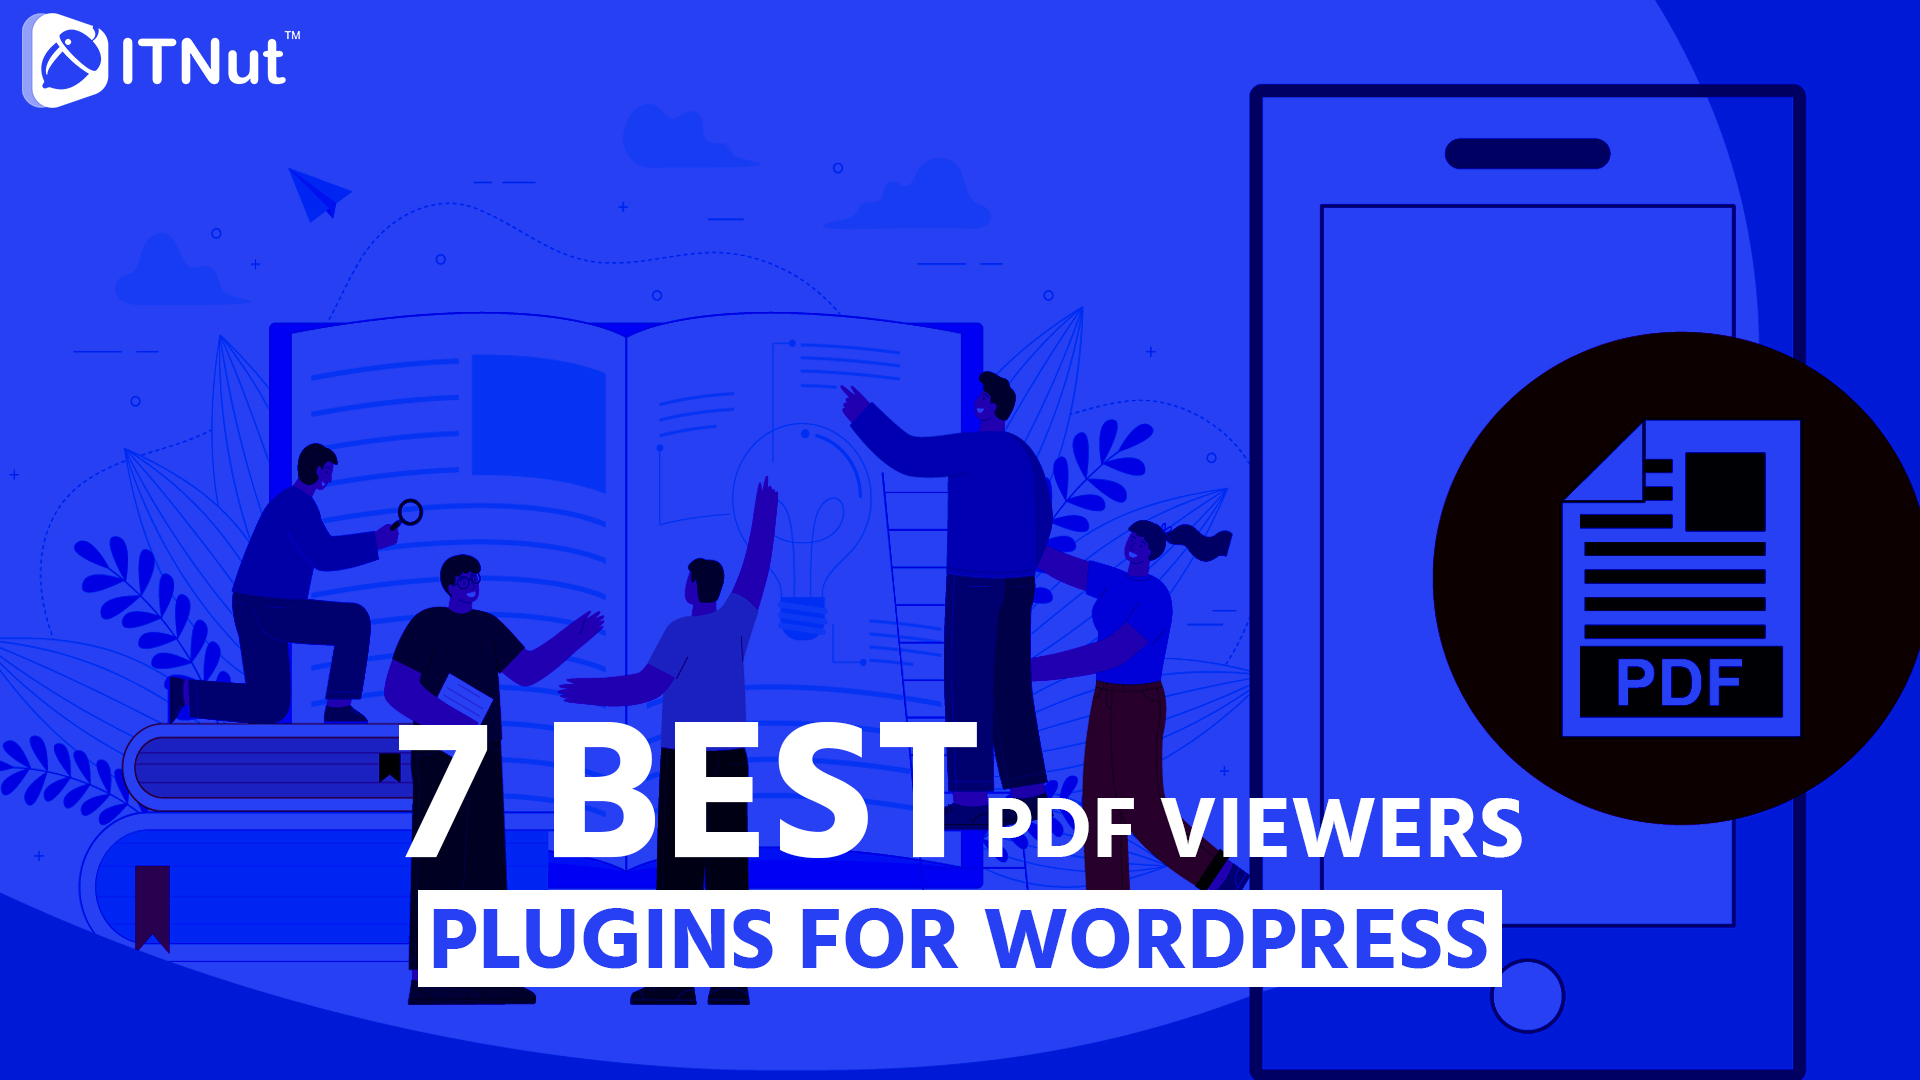 You are currently viewing 7 Best PDF Viewers Plugins for WordPress